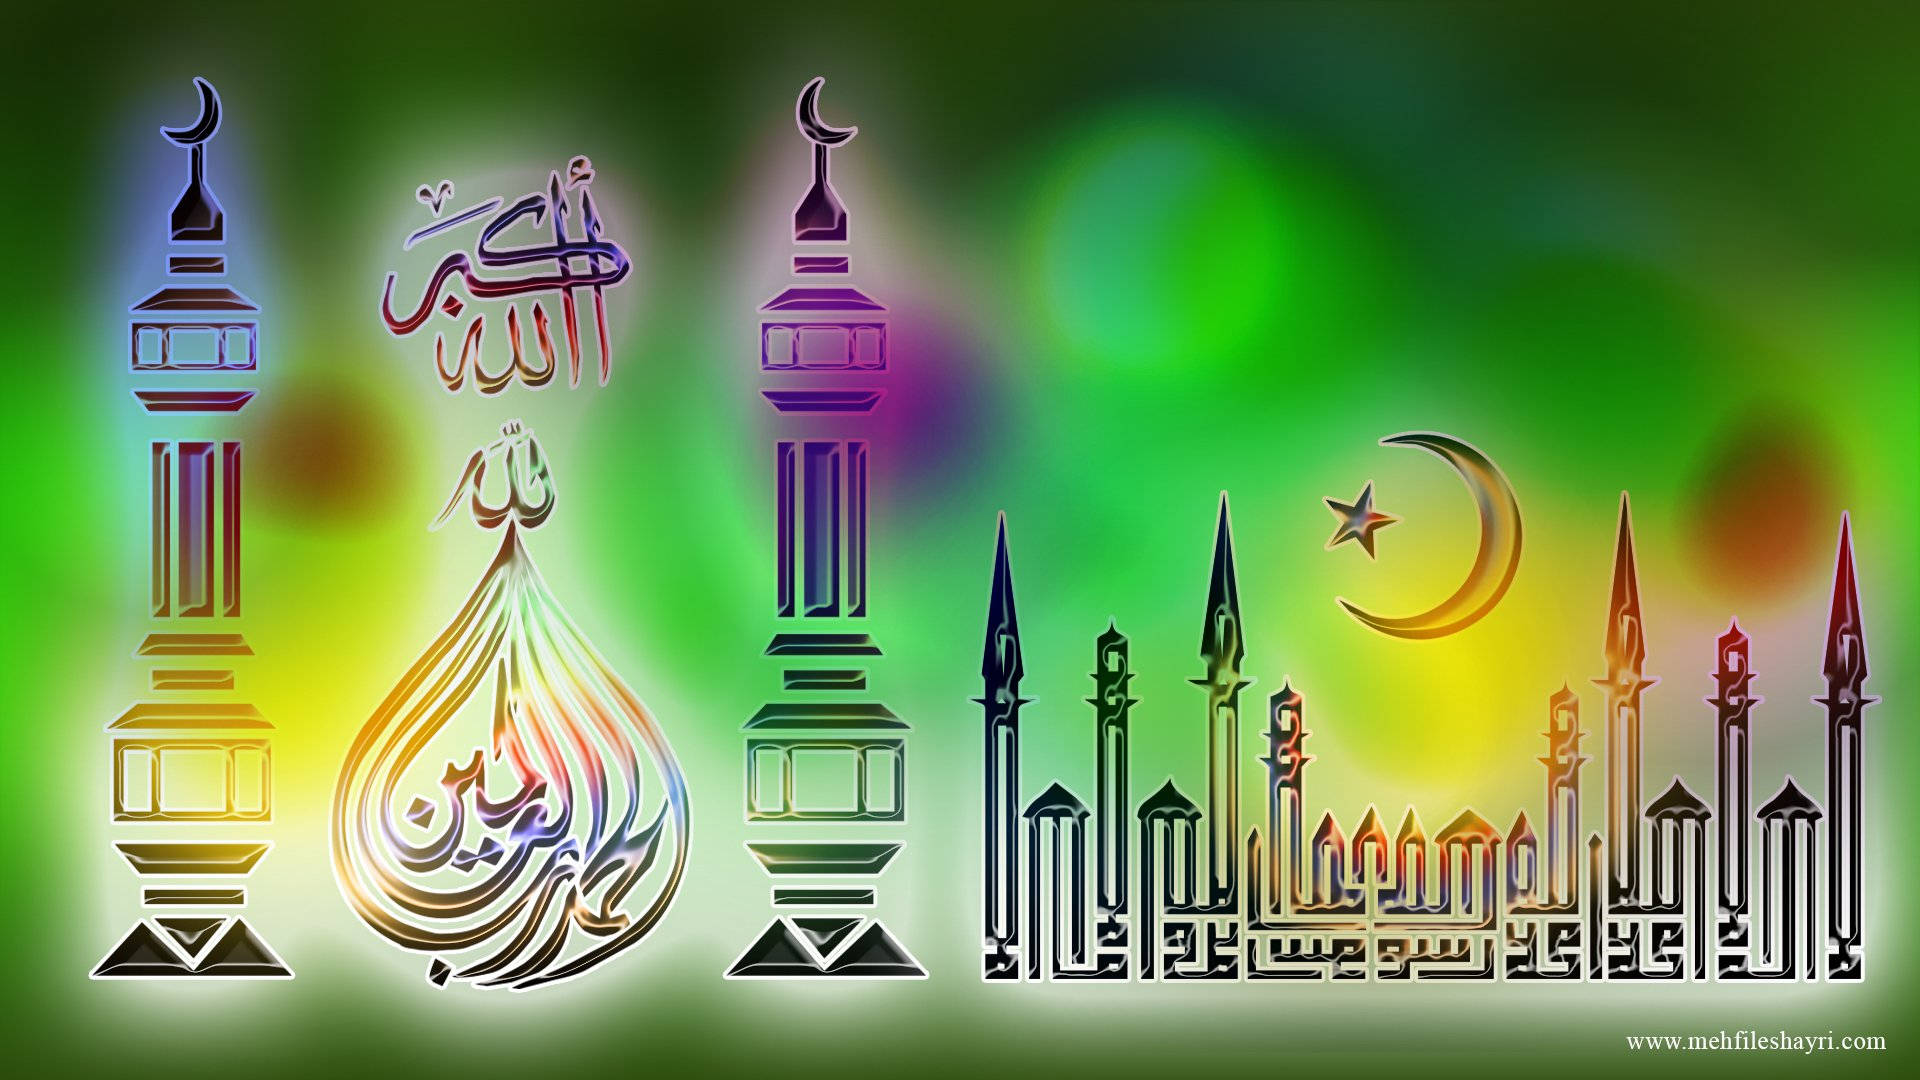 Free Hd Islamic Background Photos, [100+] Hd Islamic Background for FREE |  